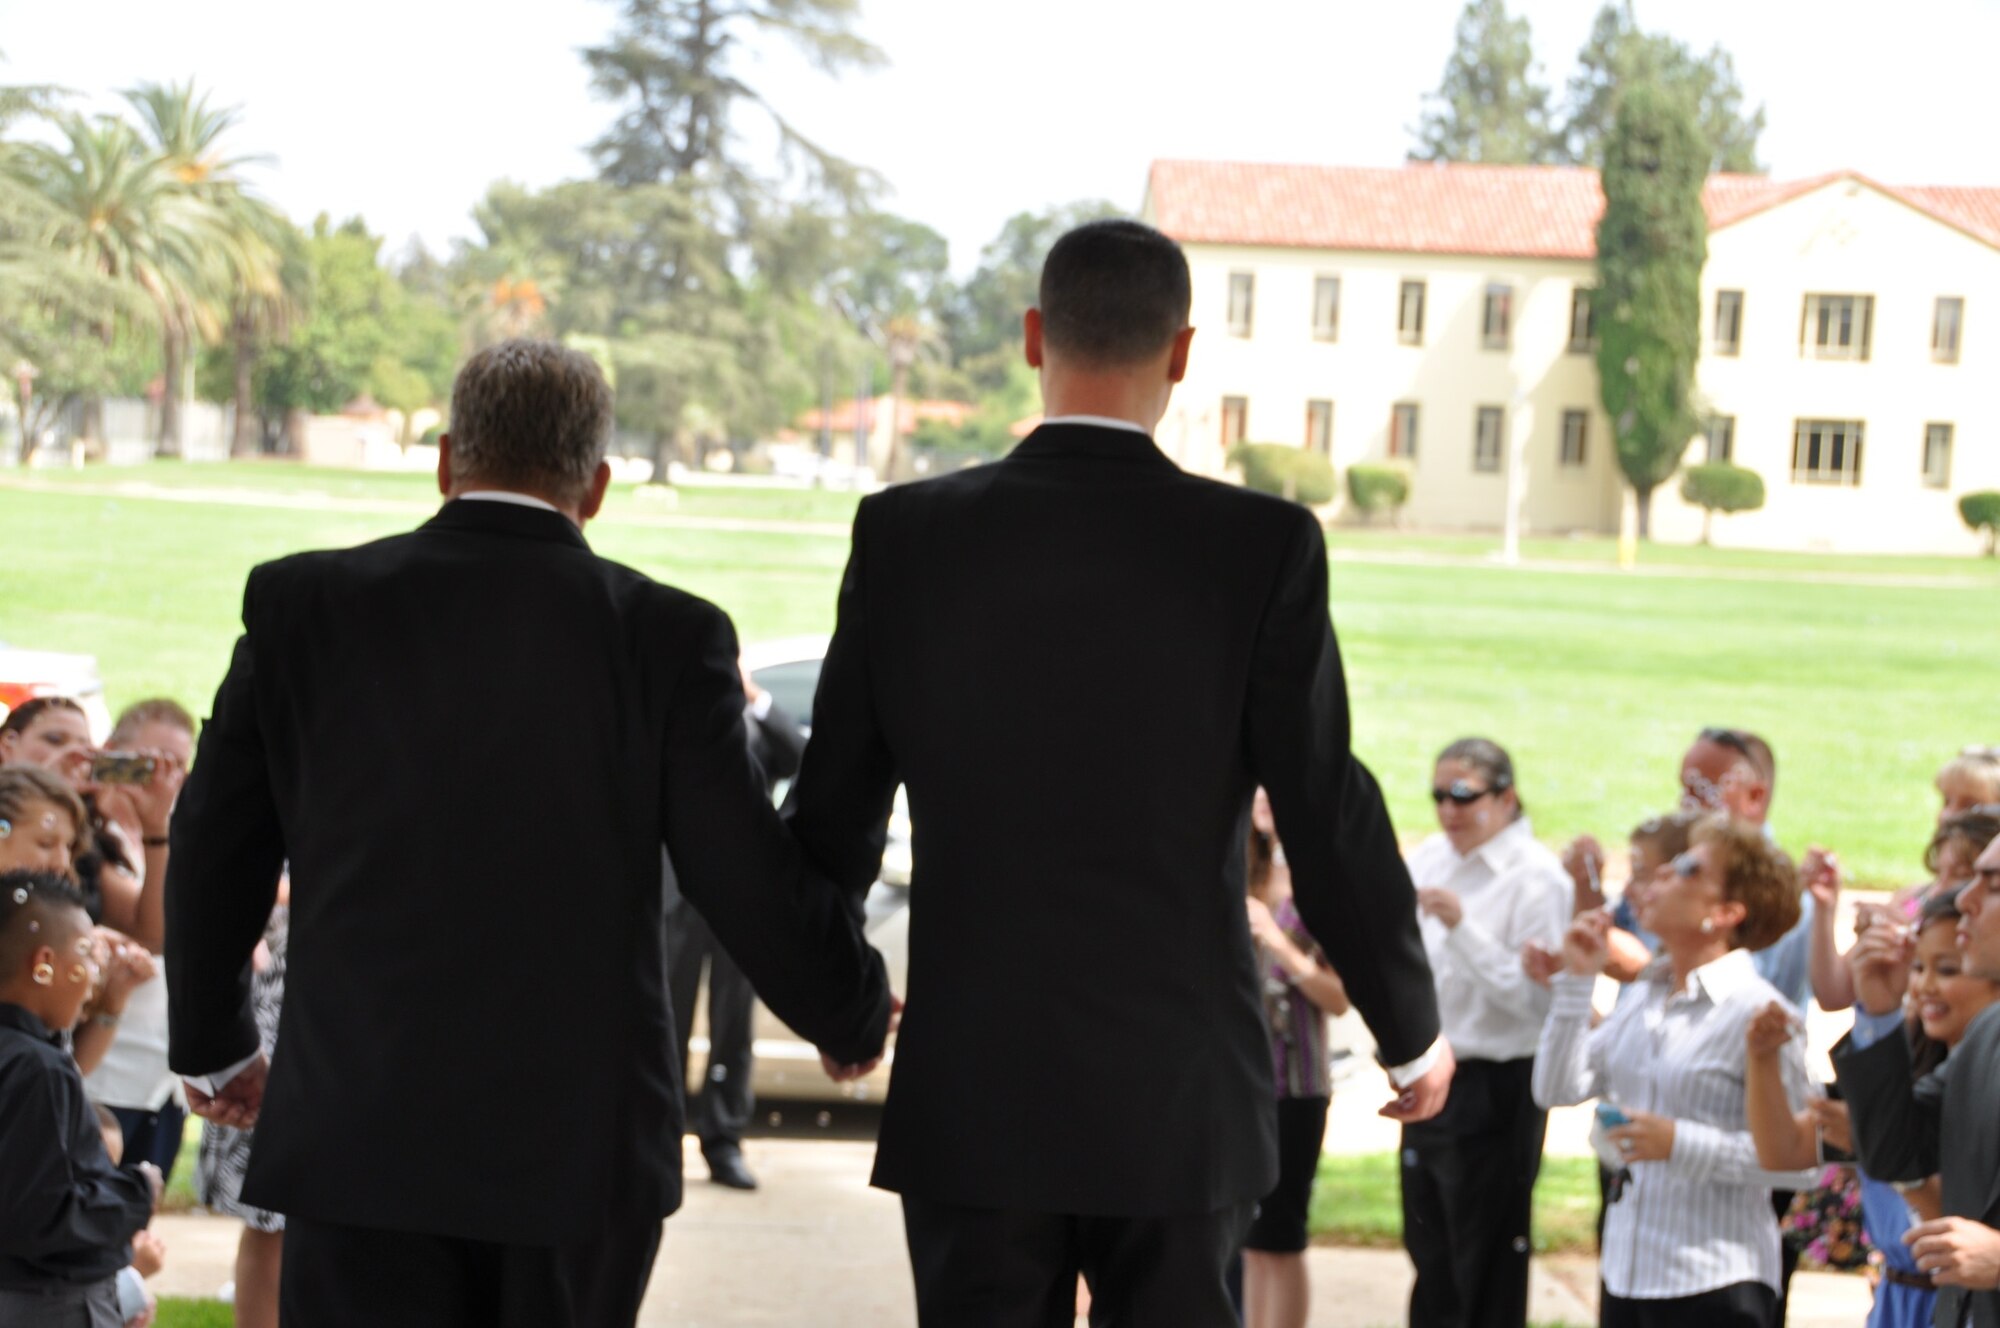 Marvin Tucker, emergency manager, 452nd Air Mobility Wing (left), and his new husband, Joshua Delgado, exit the historic March Air Reserve Base chapel Aug. 3, 2013, to celebrating guests, after the couple became the first same-sex couple to be married on the base